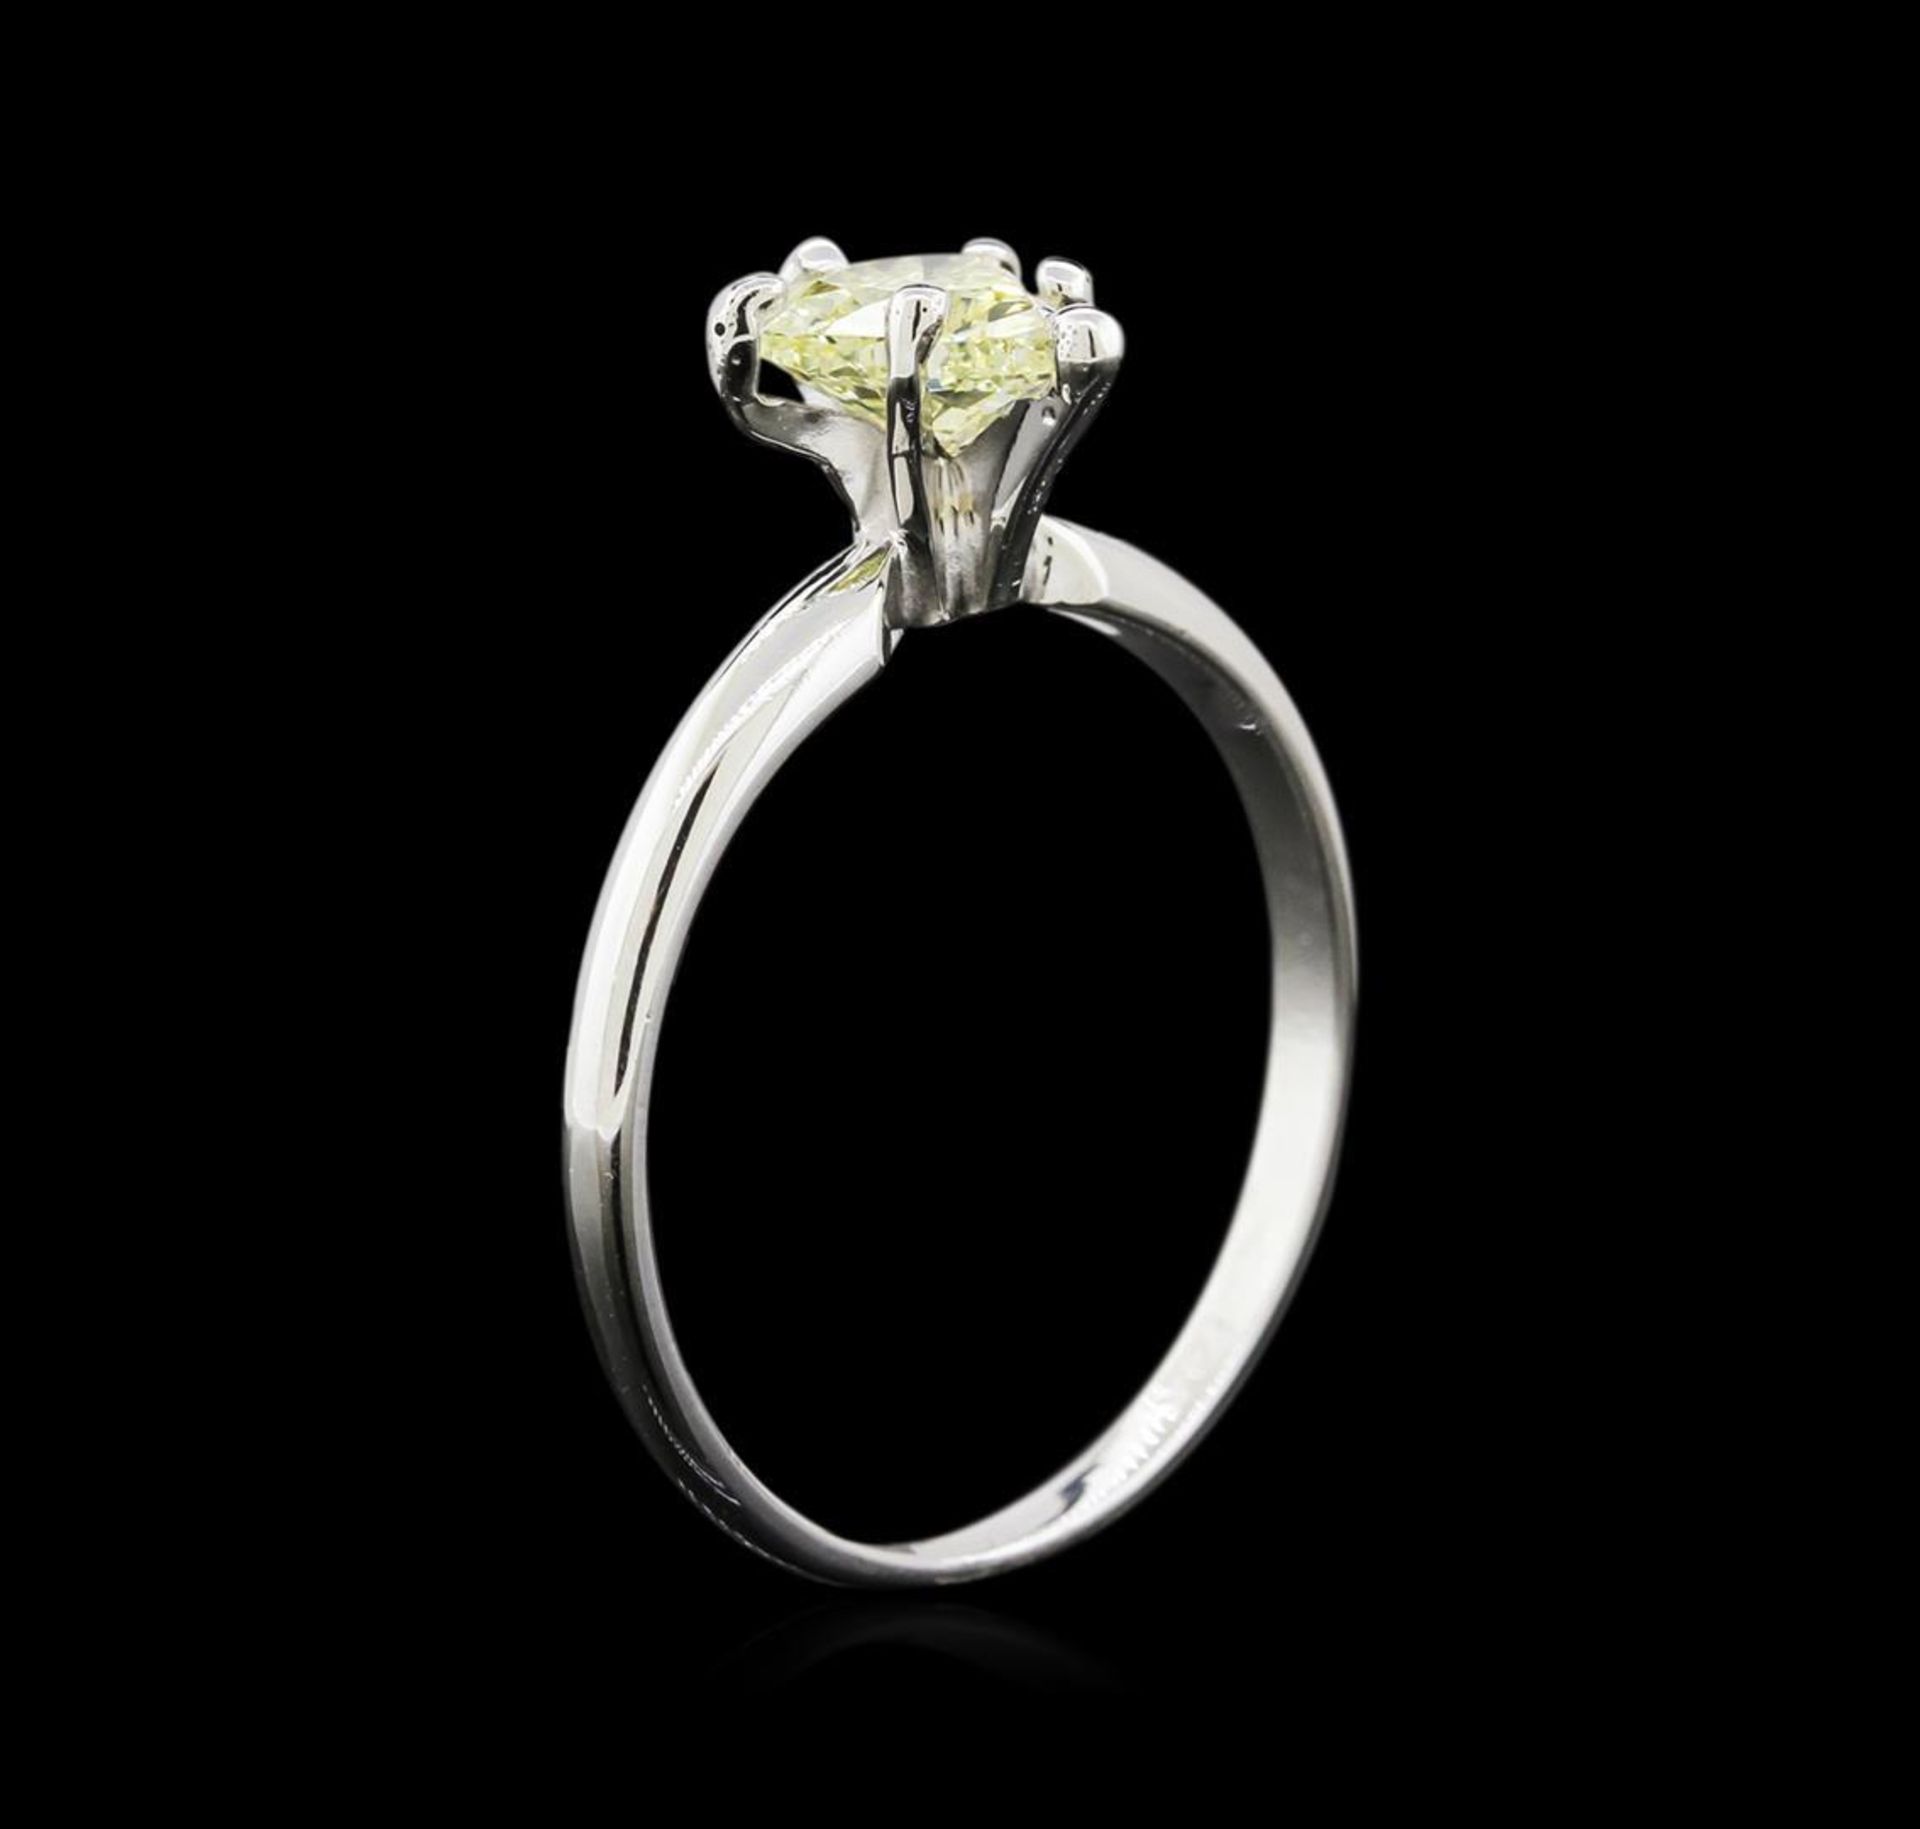 GIA Cert 0.74ctw Diamond Solitaire Ring - 14KT White Gold - Image 3 of 5